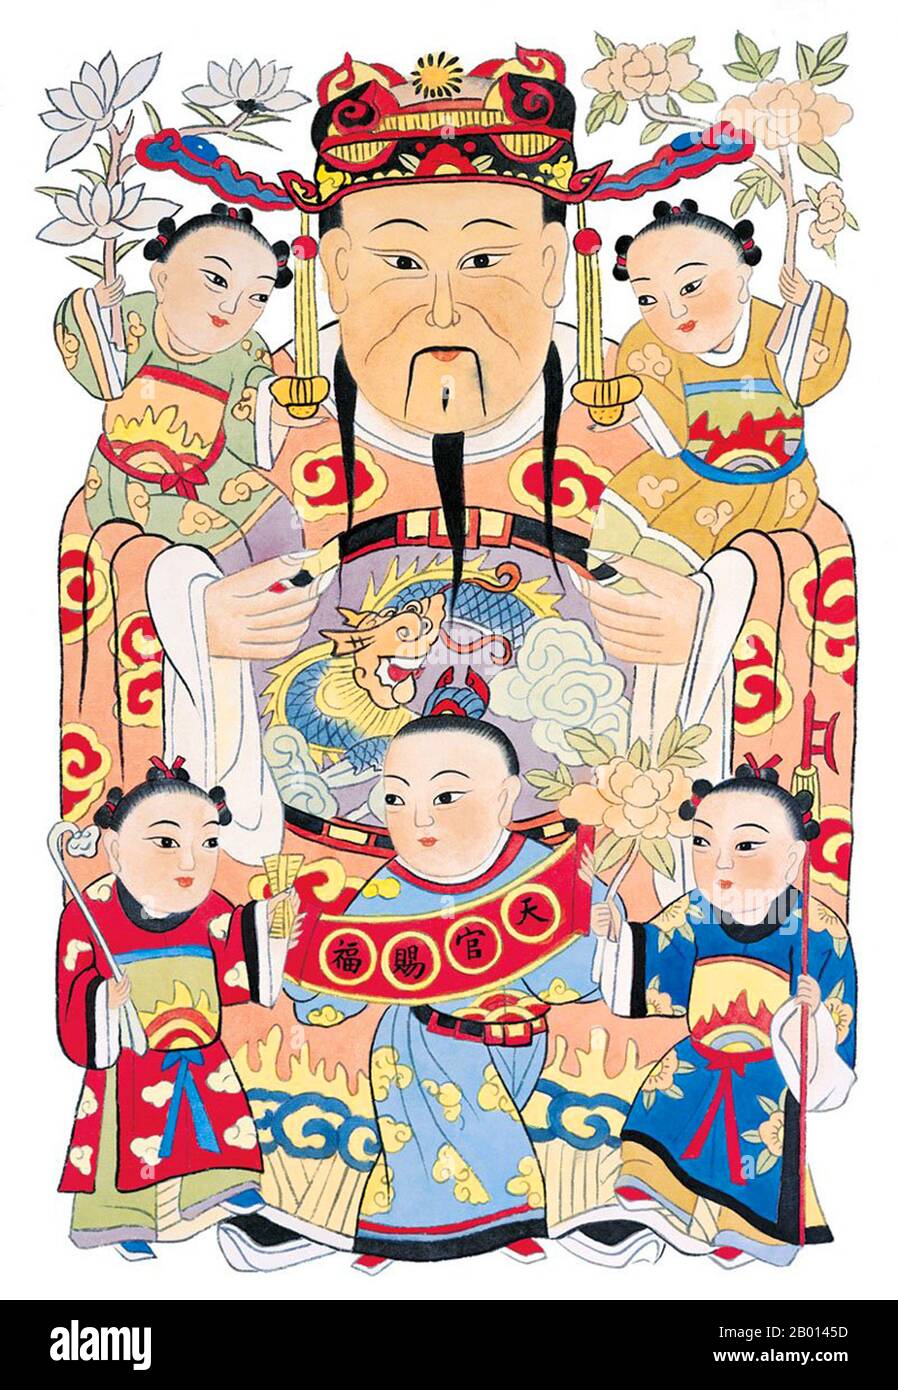 Vietnam: A Vietnamese painting of the Jade Emperor, Ngoc Hoang Thuong De (Ngọc Hoàng Thượng Đế), the 'Jade Emperor God', 20th century.  The Jade Emperor is the Daoist ruler of Heaven and all realms of existence below including that of Man and Hell, according to Daoist mythology. He is one of the most important gods of the Chinese traditional religion pantheon. In Daoist belief, the Jade Emperor governs all of the mortals' realm and below, but ranks below the Three Pure Ones. Stock Photo